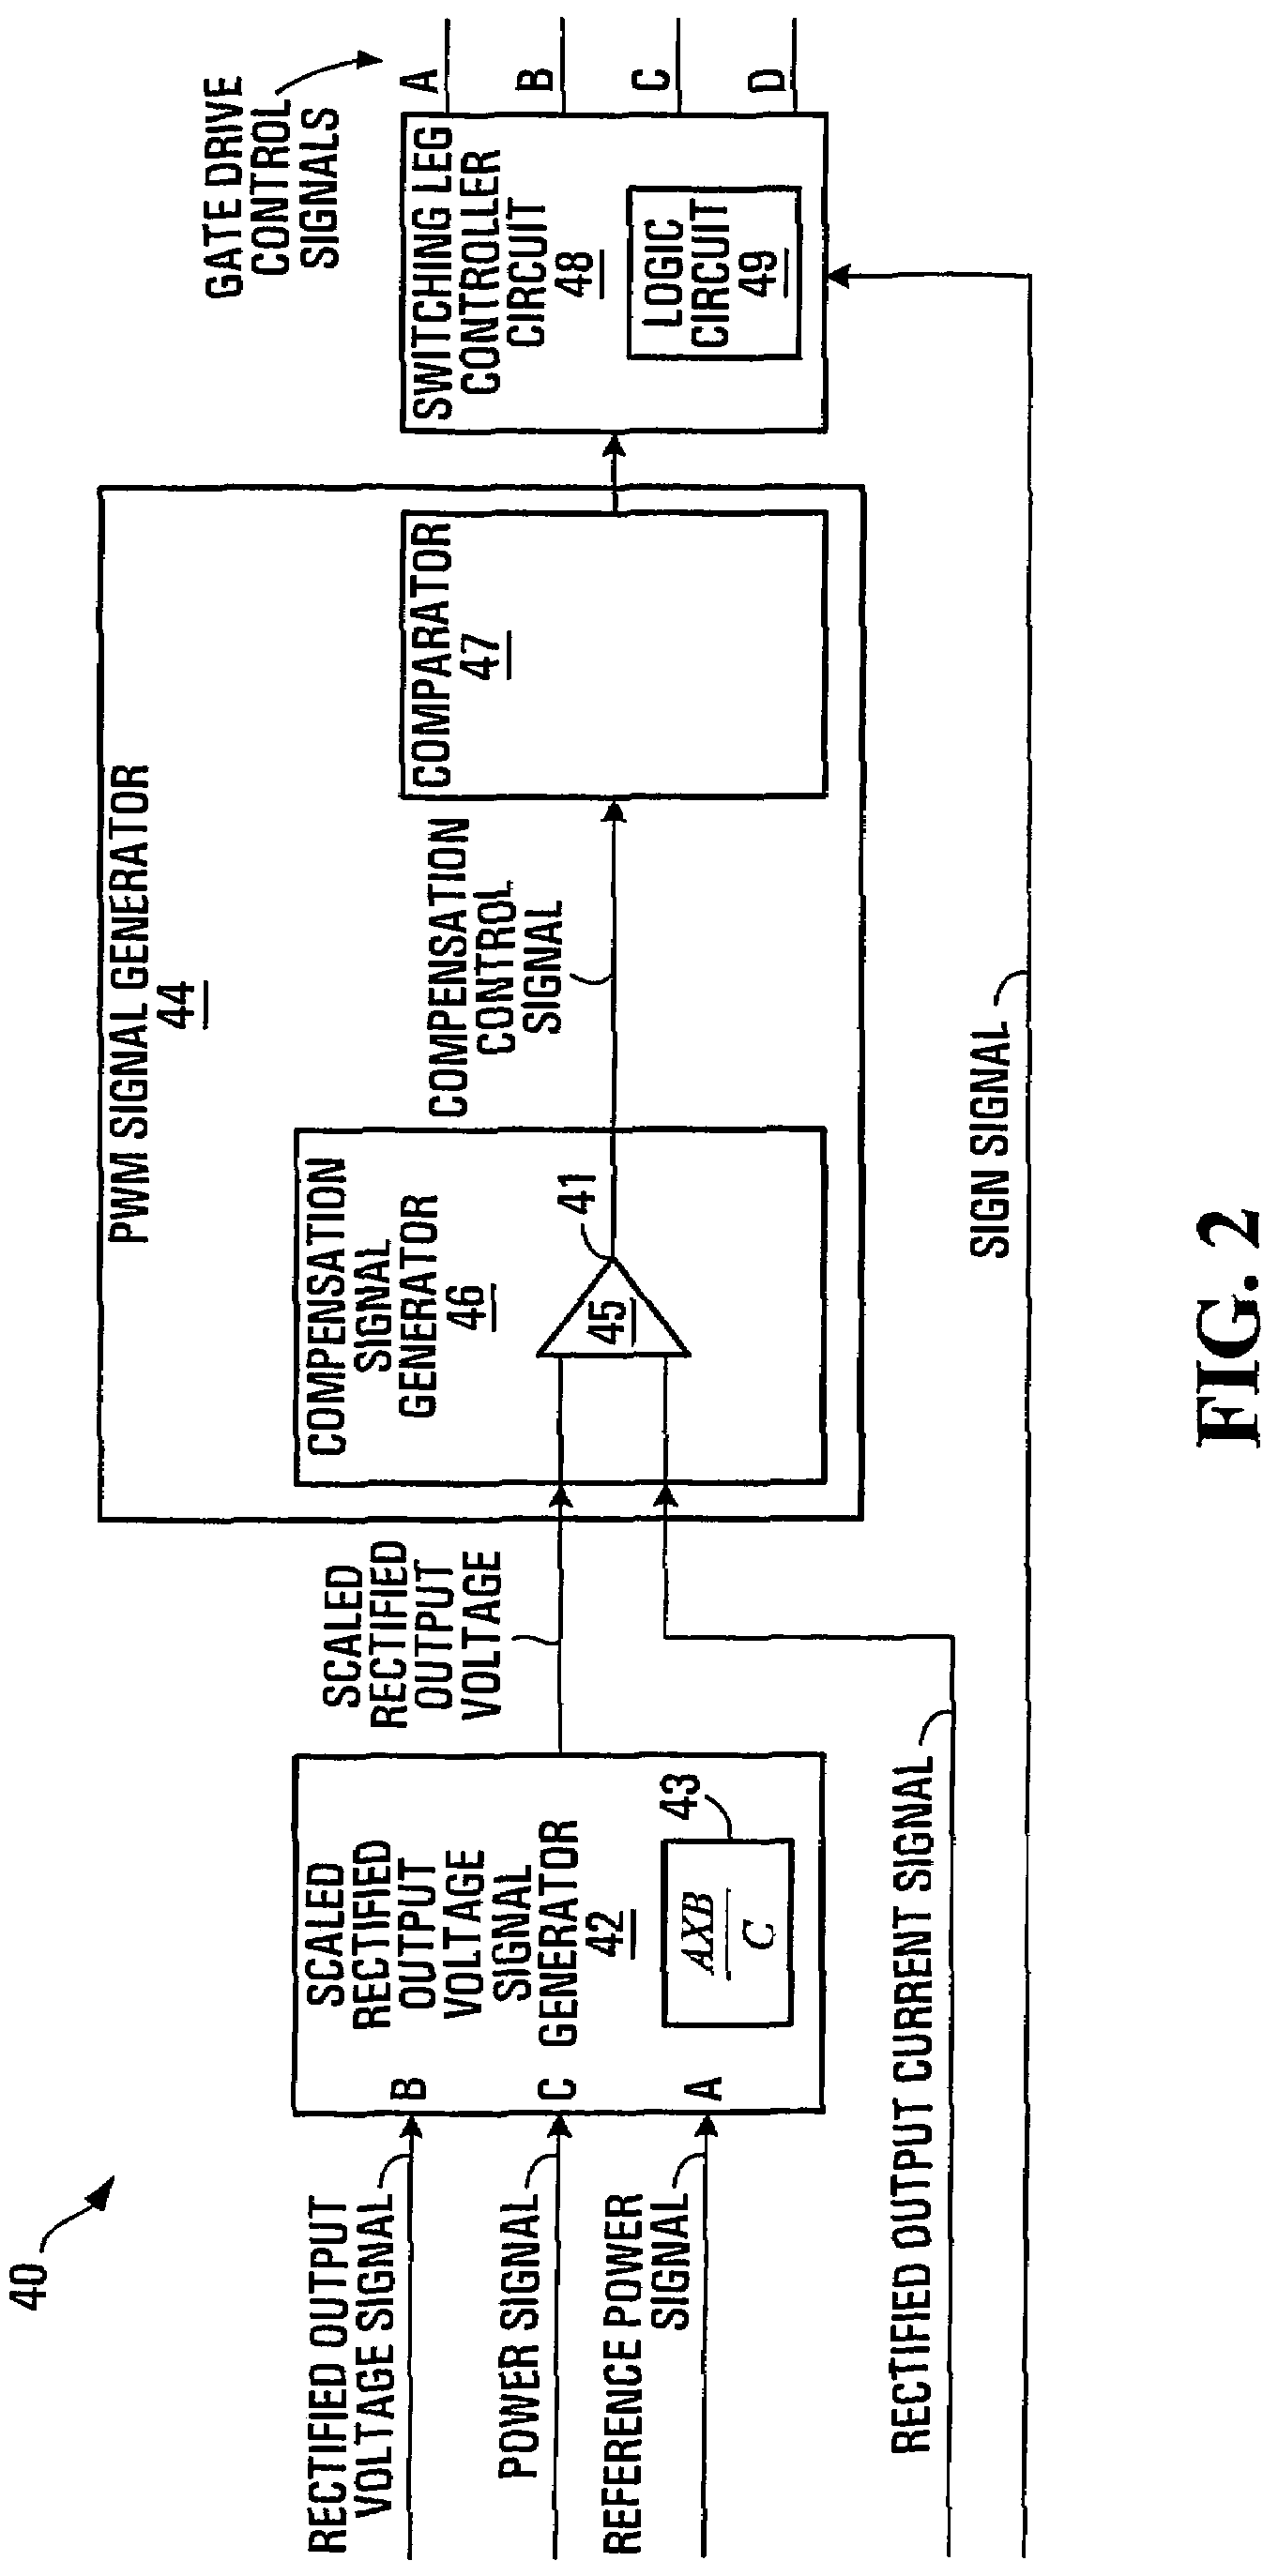 Output power factor control of pulse-width modulated inverter